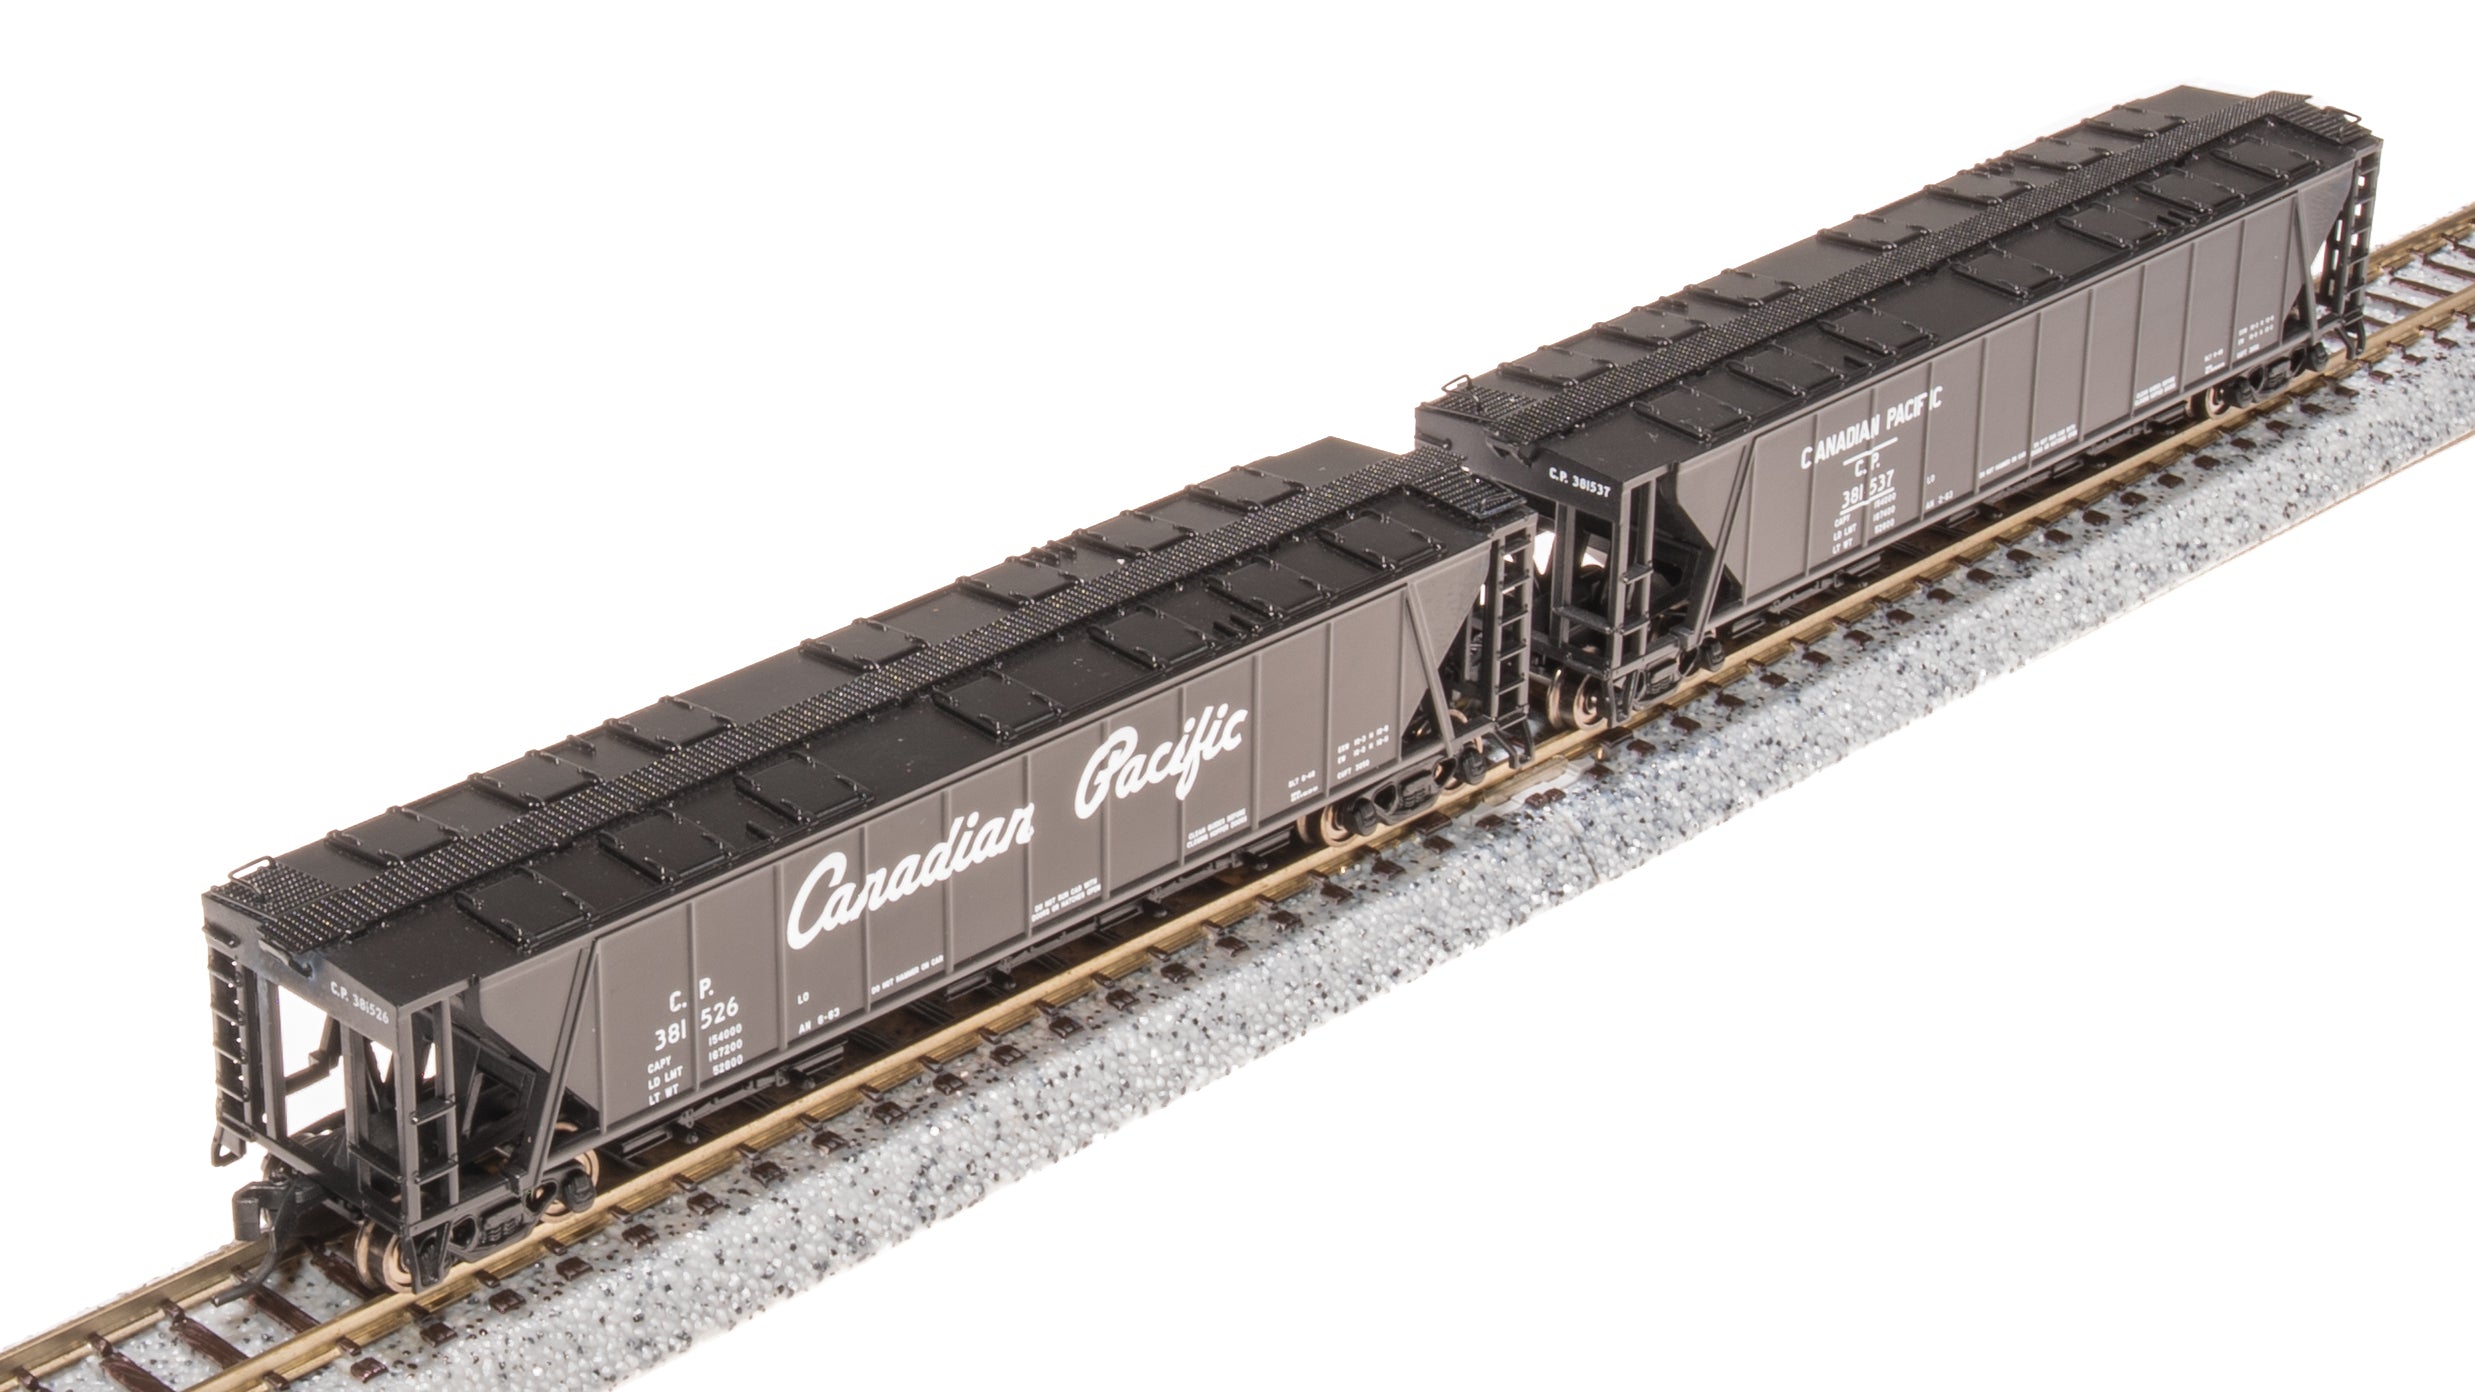 7260 H32 Covered Hopper, CP, Variety 2-pack, N Scale (Fantasy Paint Scheme) Default Title